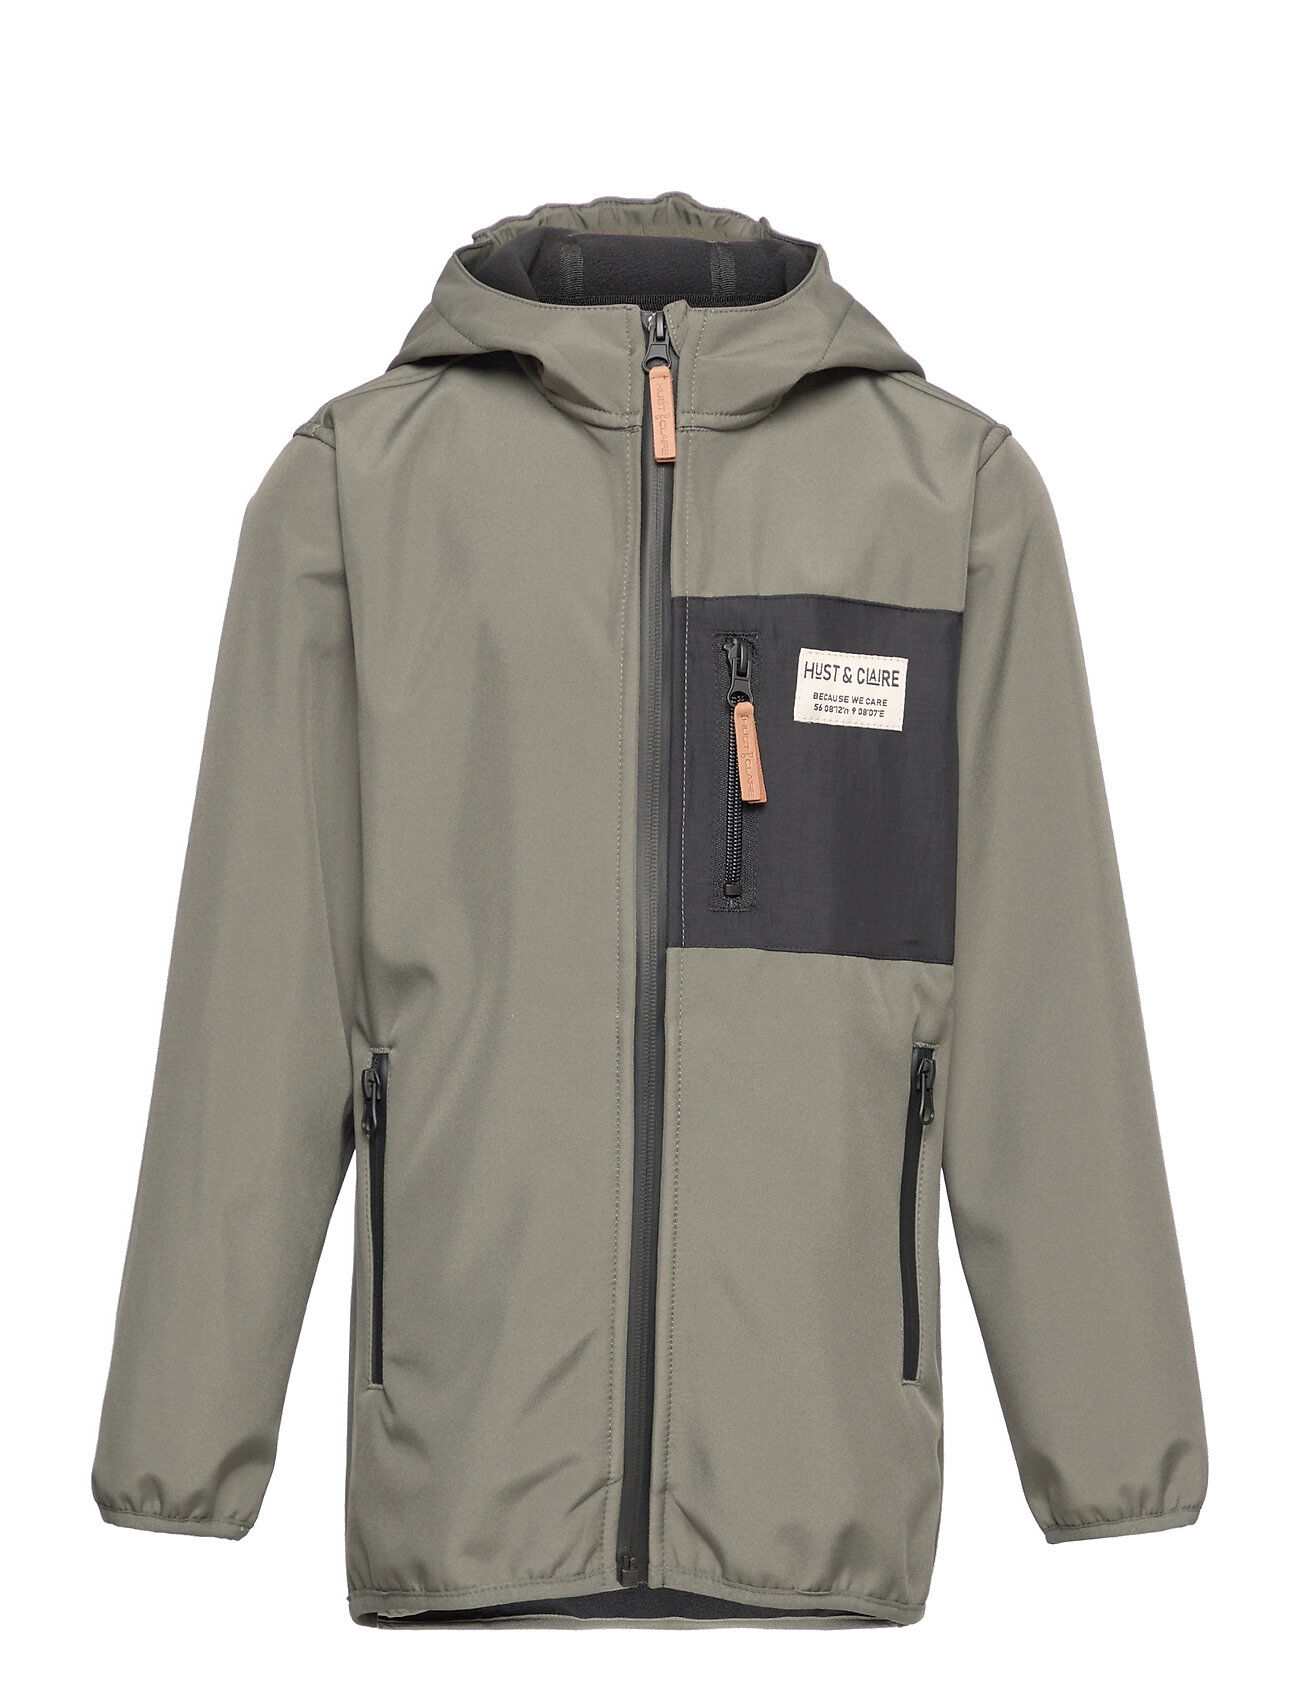 Hust & Claire Odin - Jacket Outerwear Shell Clothing Shell Jacket Grå Hust & Claire